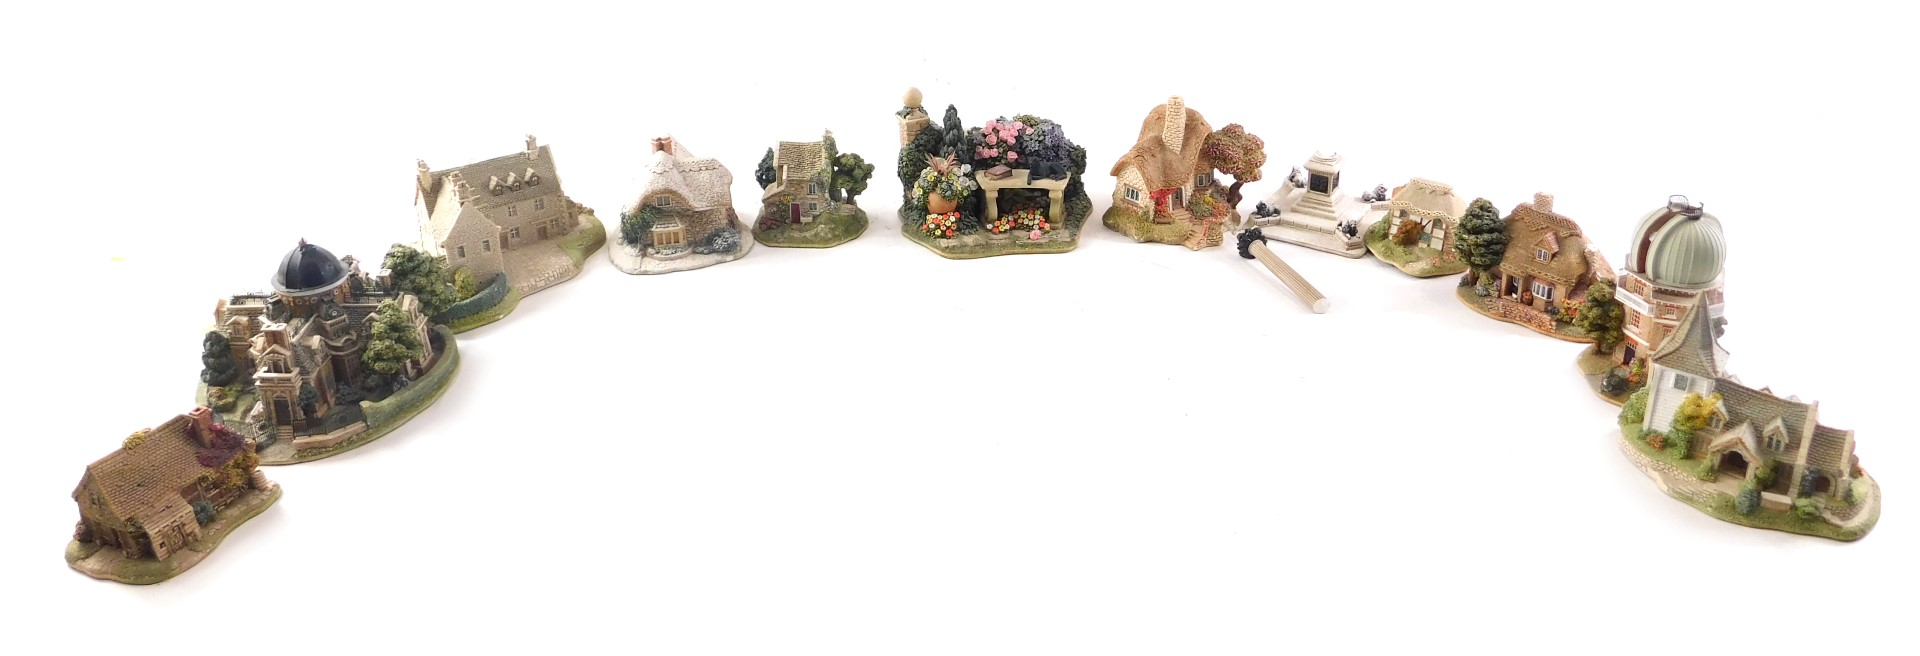 A quantity of Lilliput Lane cottages, to include Peaceful Pastimes, The Planetarium, Greensted Churc